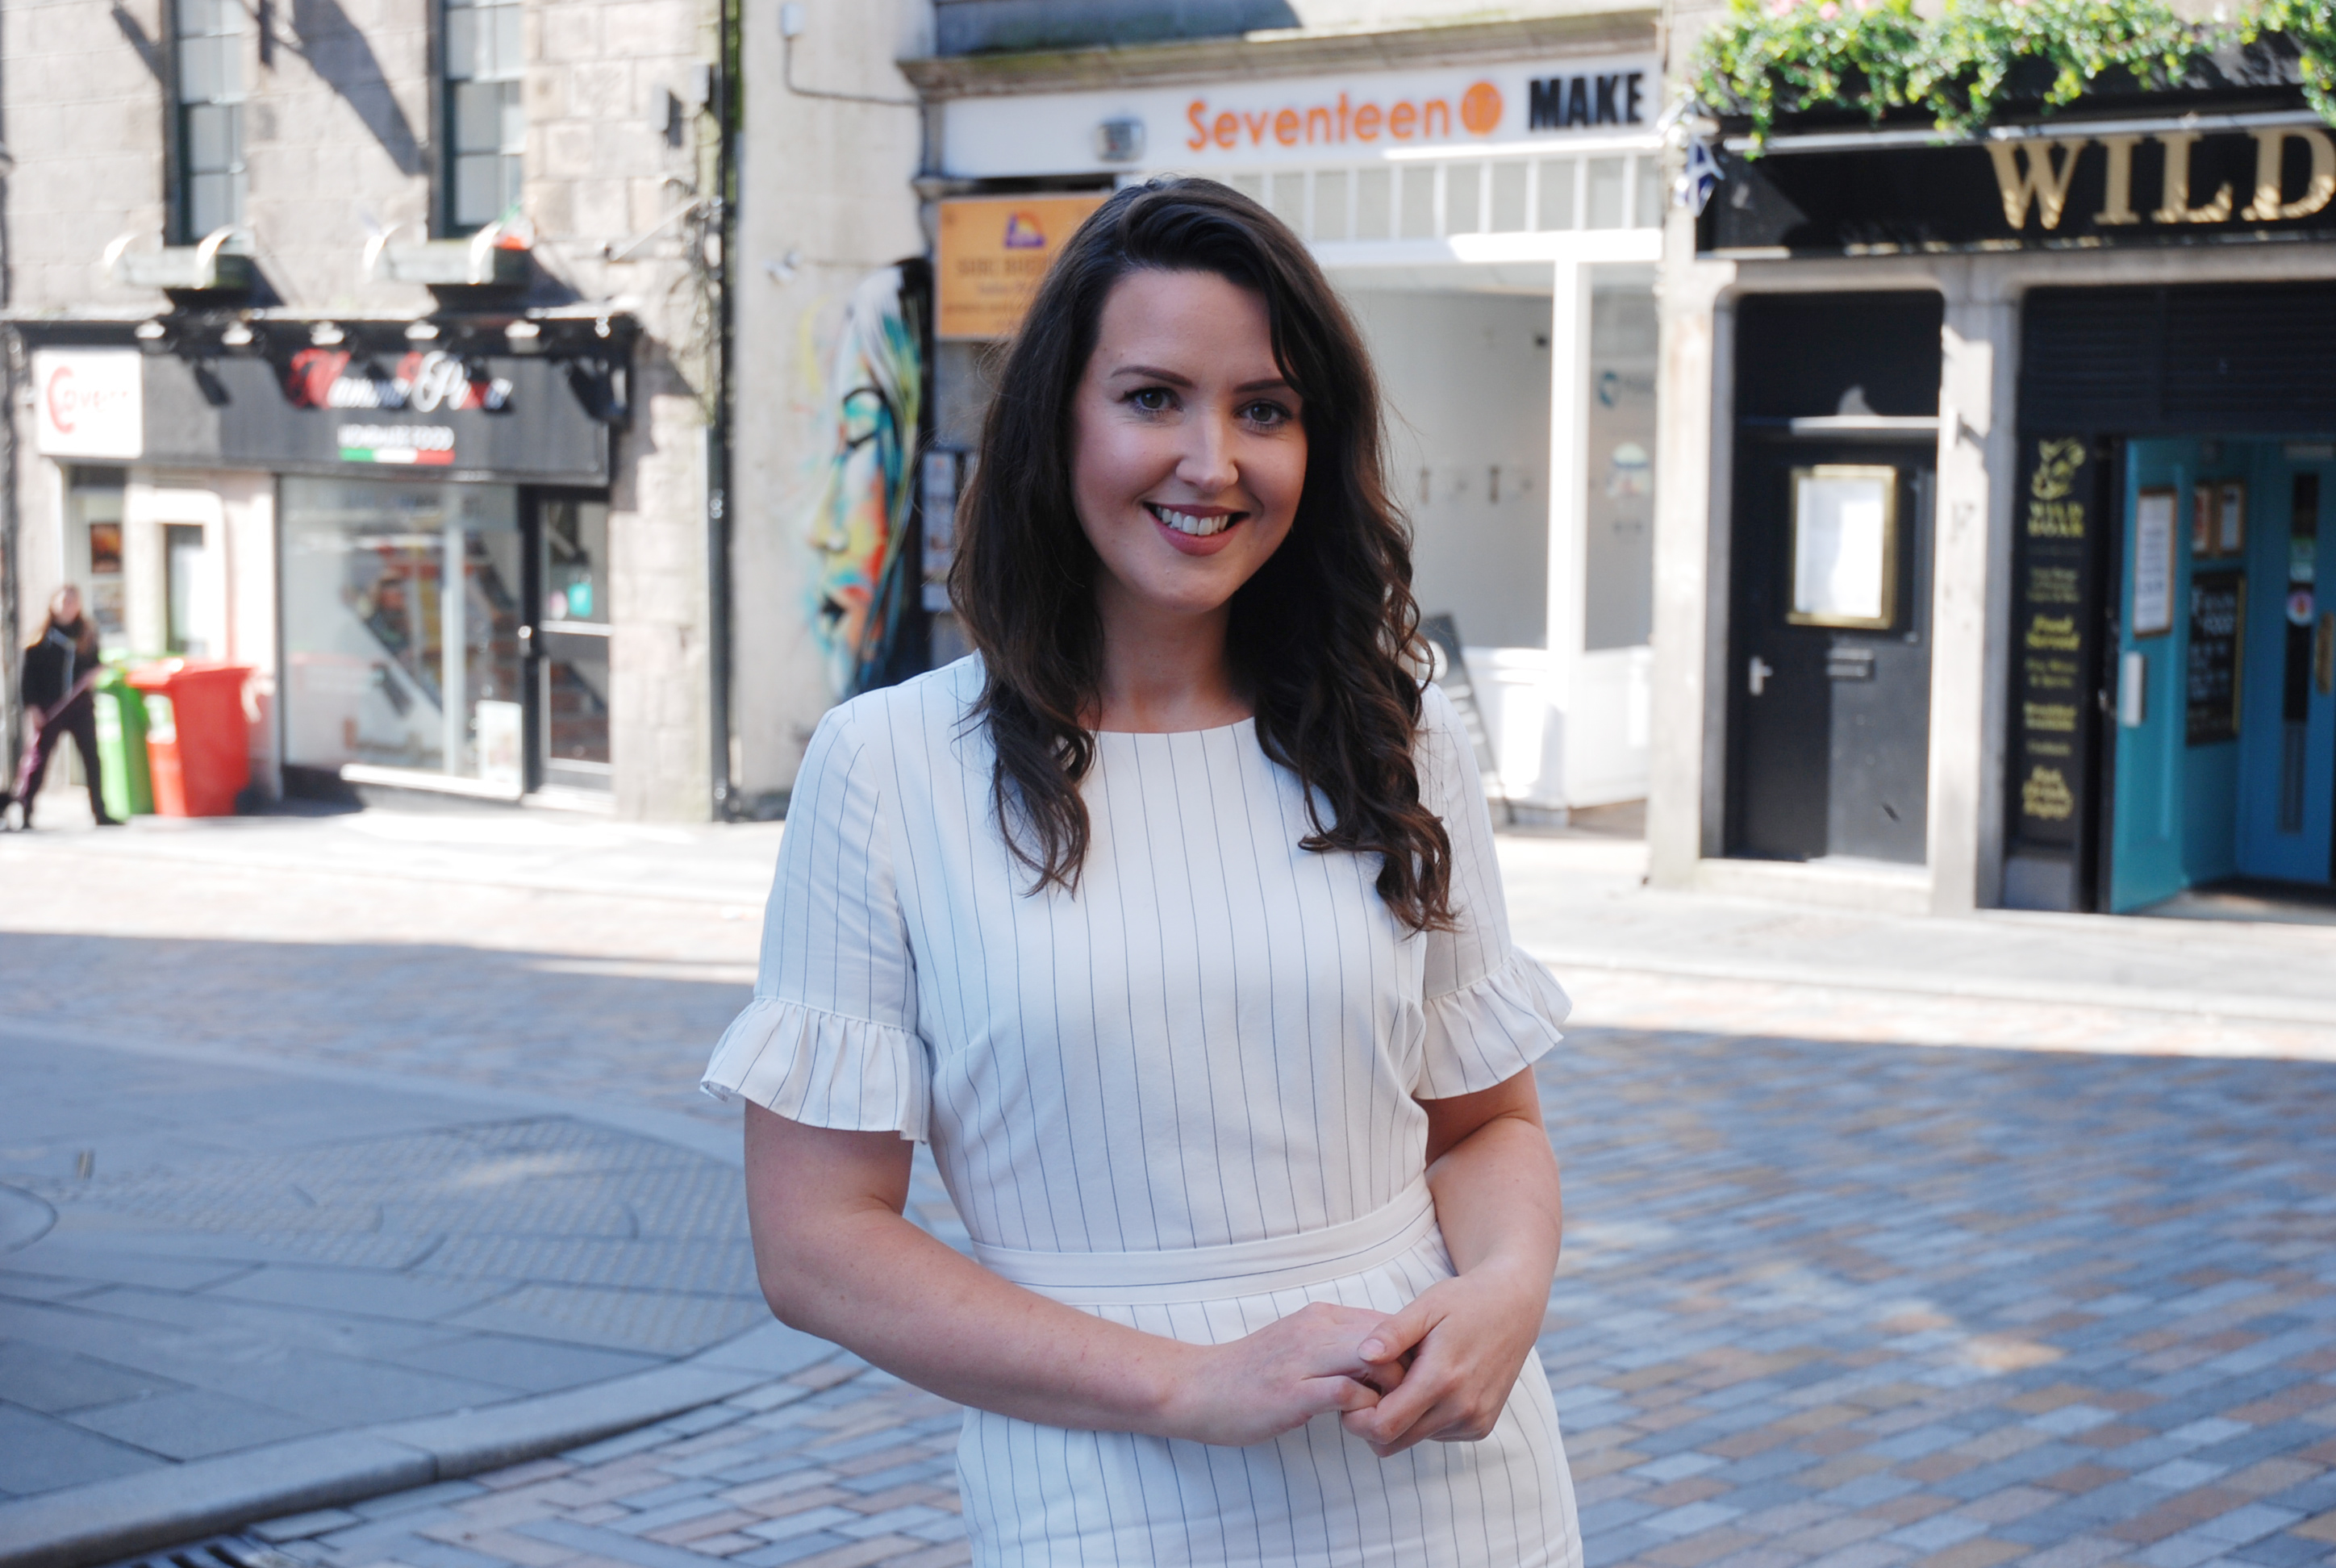 Aberdeen Inspired is organising the festival, and its evening and nighttime economy manager, Nicola Marie Johnston, explained the idea behind it.